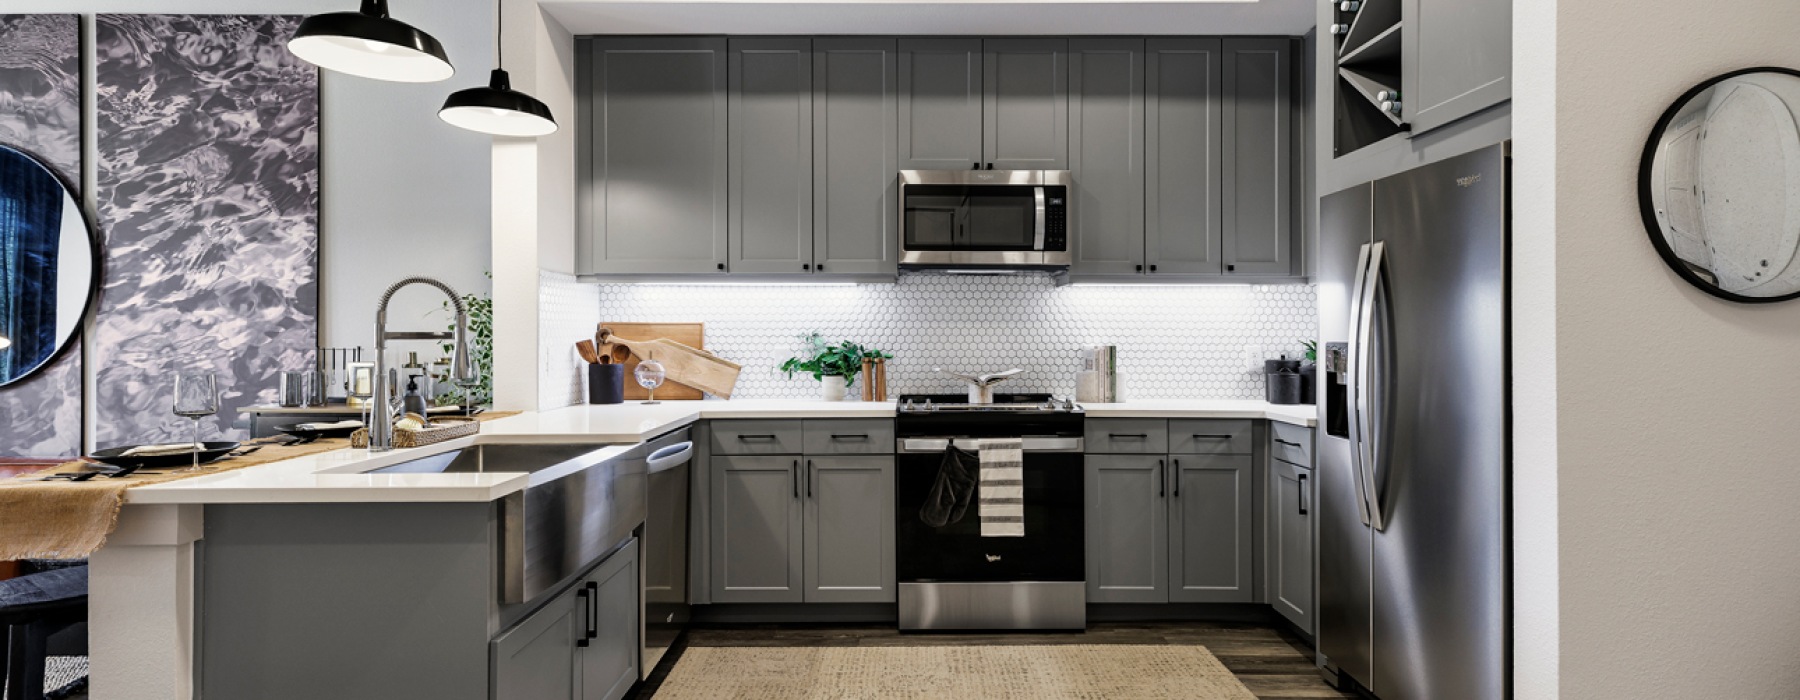 Kitchen with grey cabinets